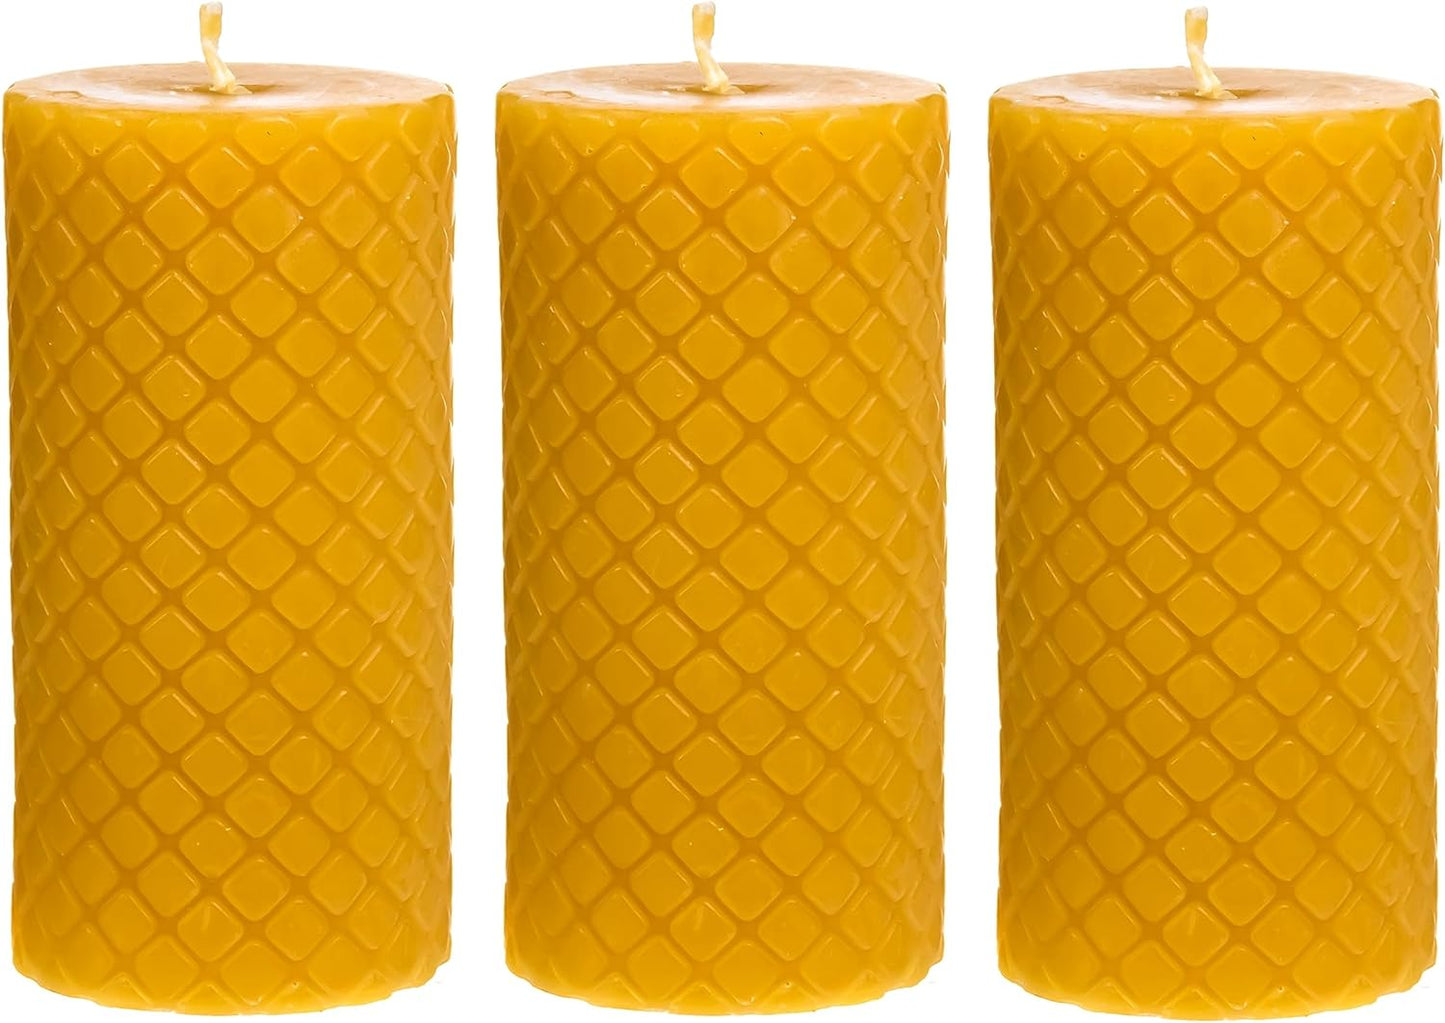 Hand-Poured 100% Pure Beeswax Diamond Pillar Candles (2X4 Inch), 3 Pack, 20 Hour Burn Time - Yellow